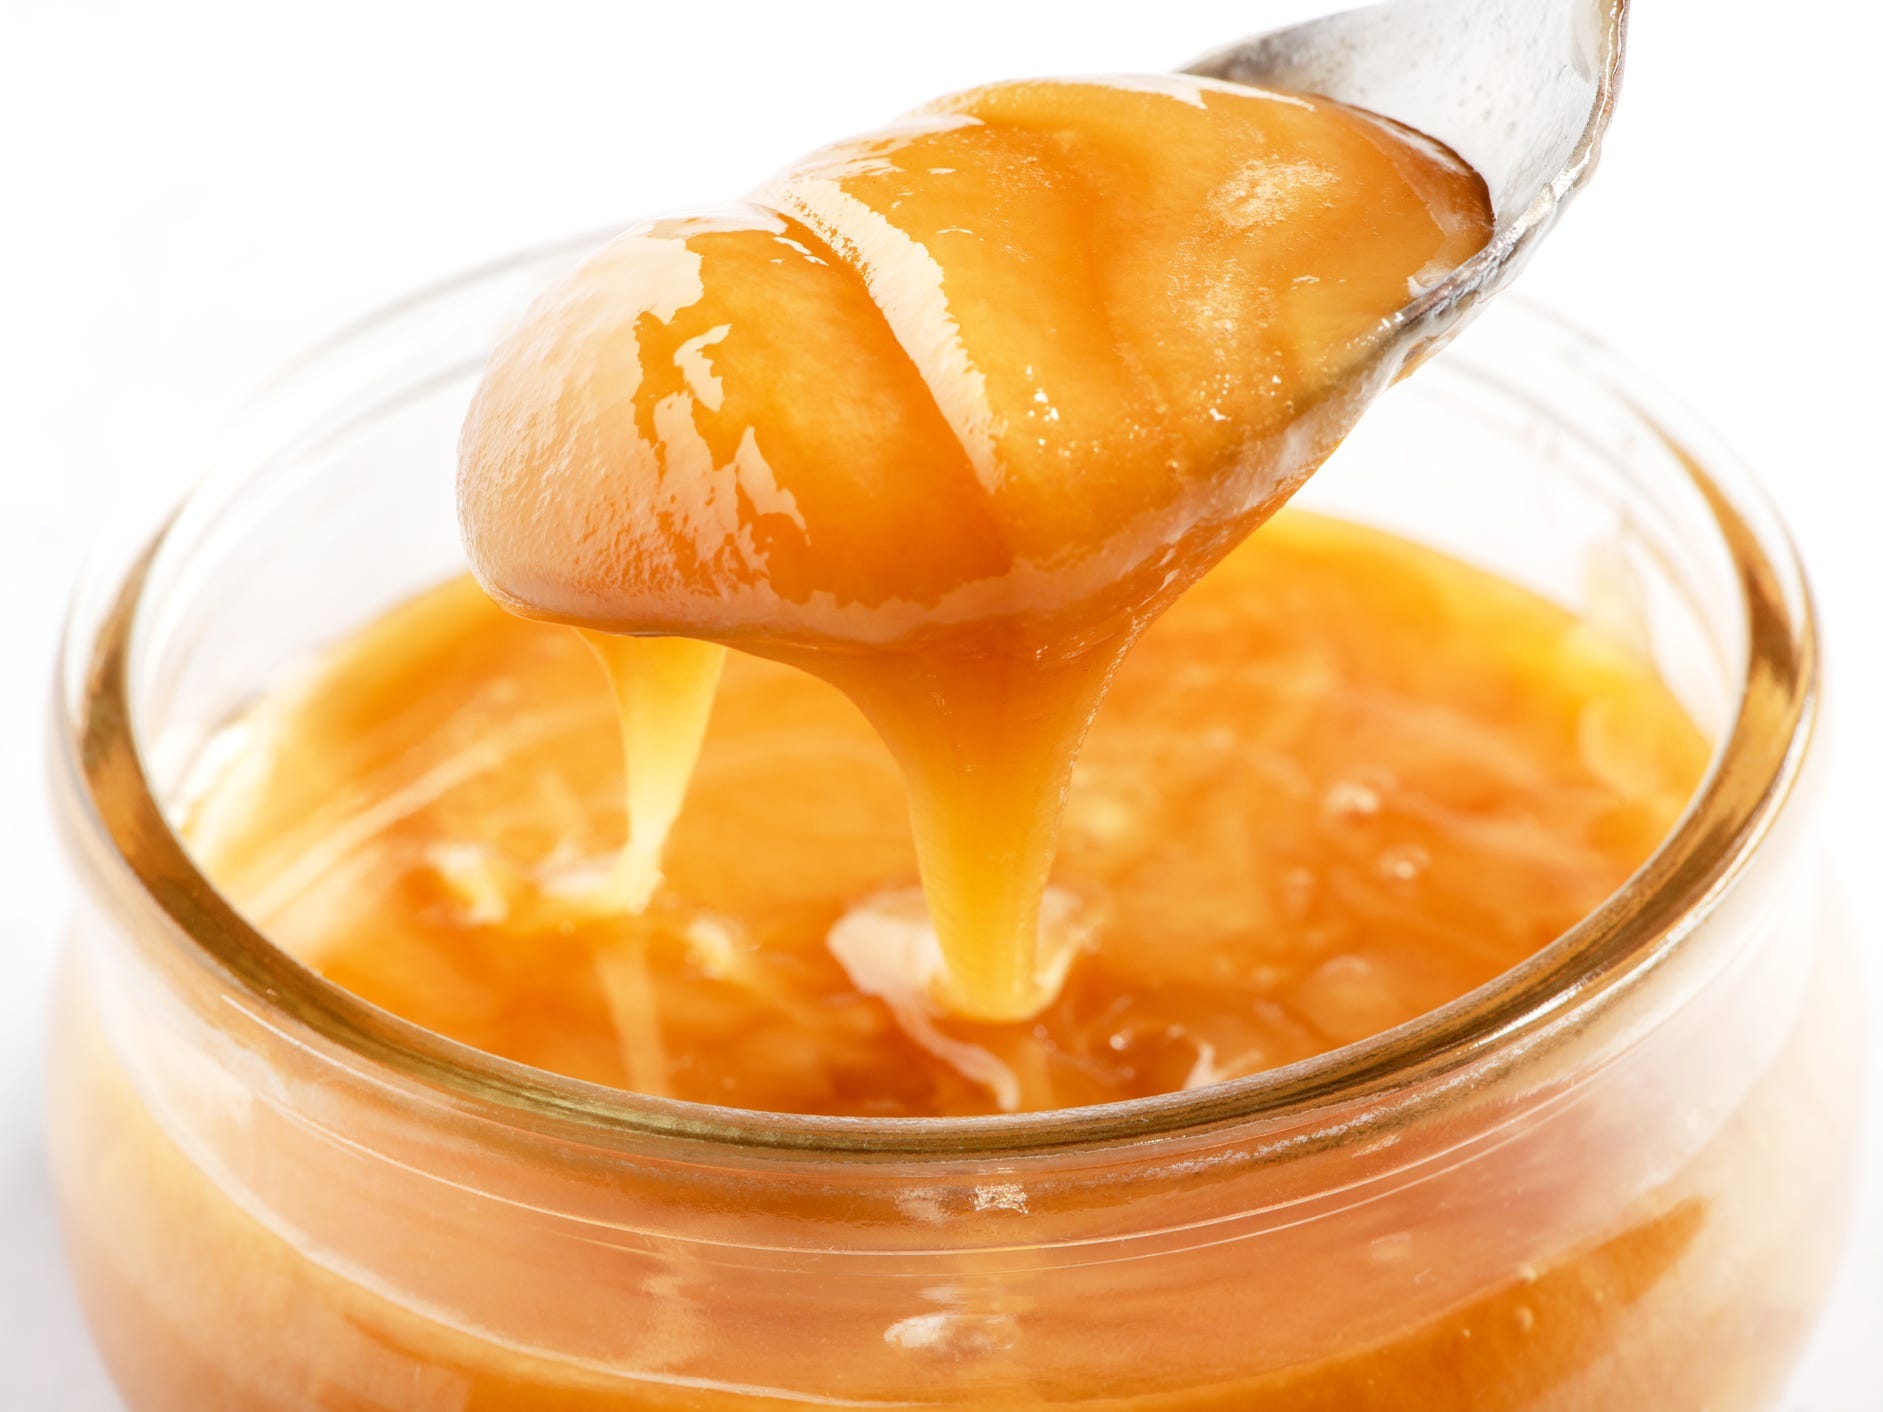 A spoon of crystallized thick honey being lifted from a jar.